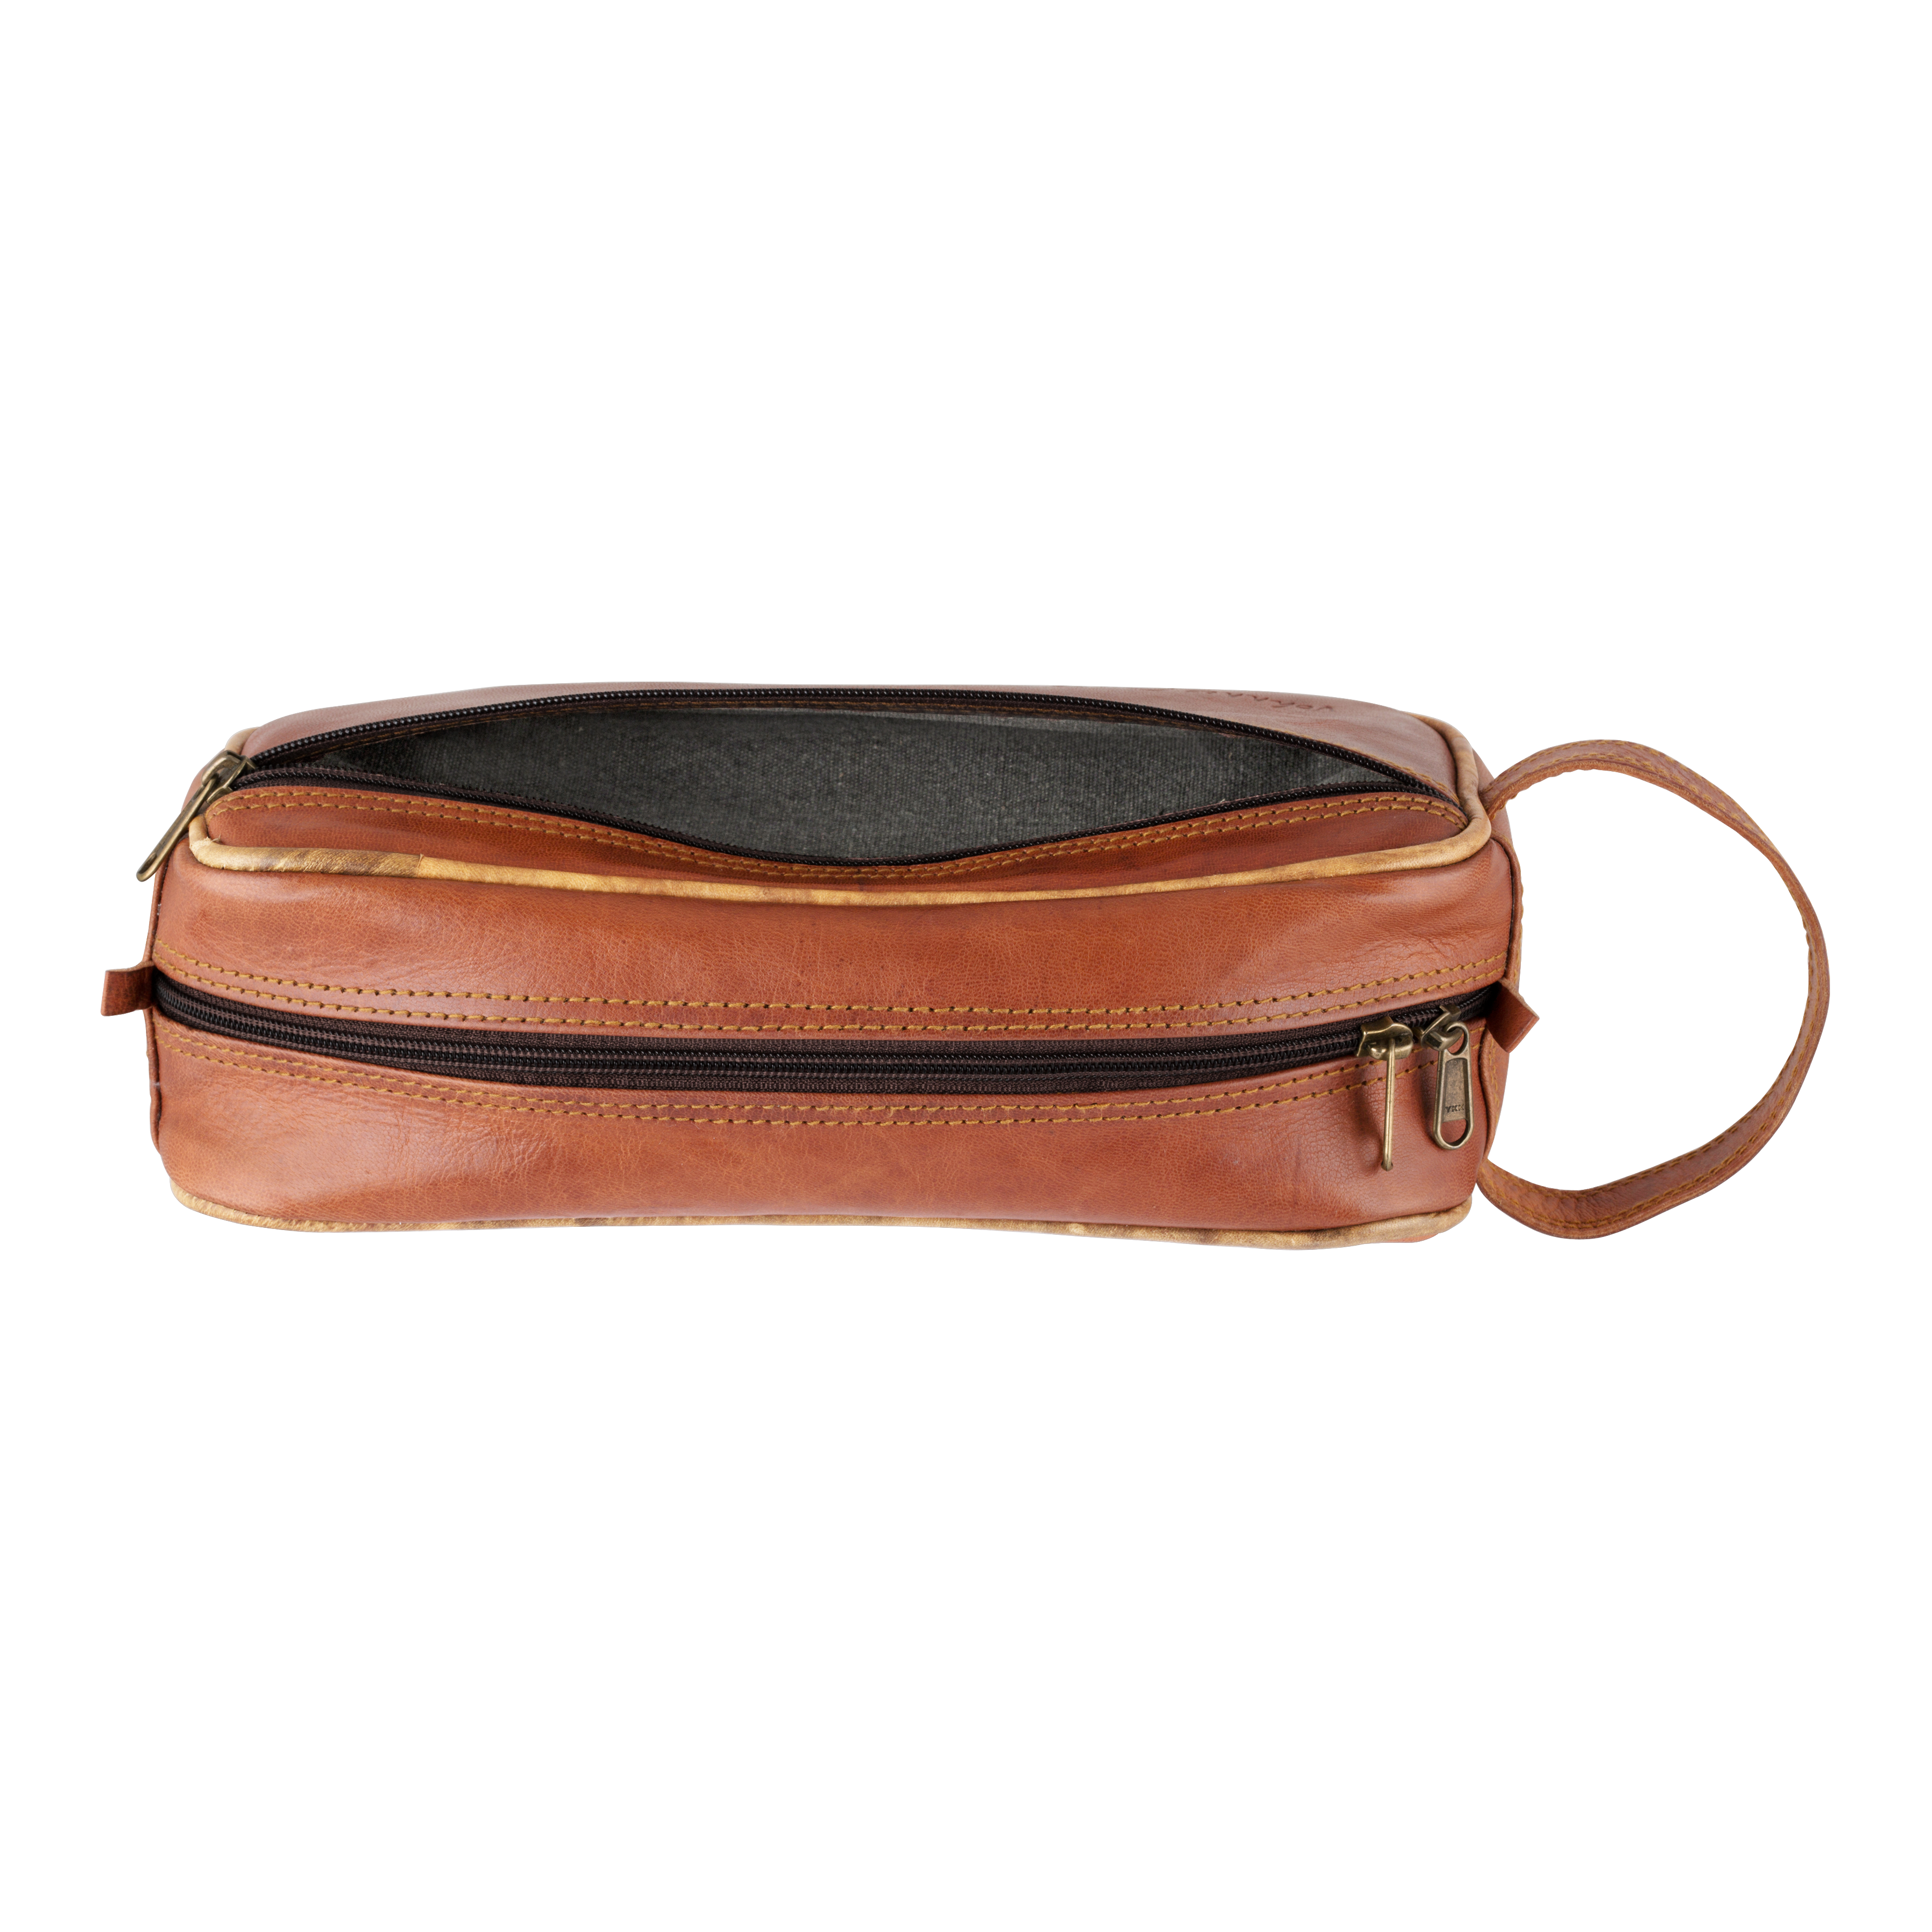 Dopp Kit - Johnny Fly - Leather Bags